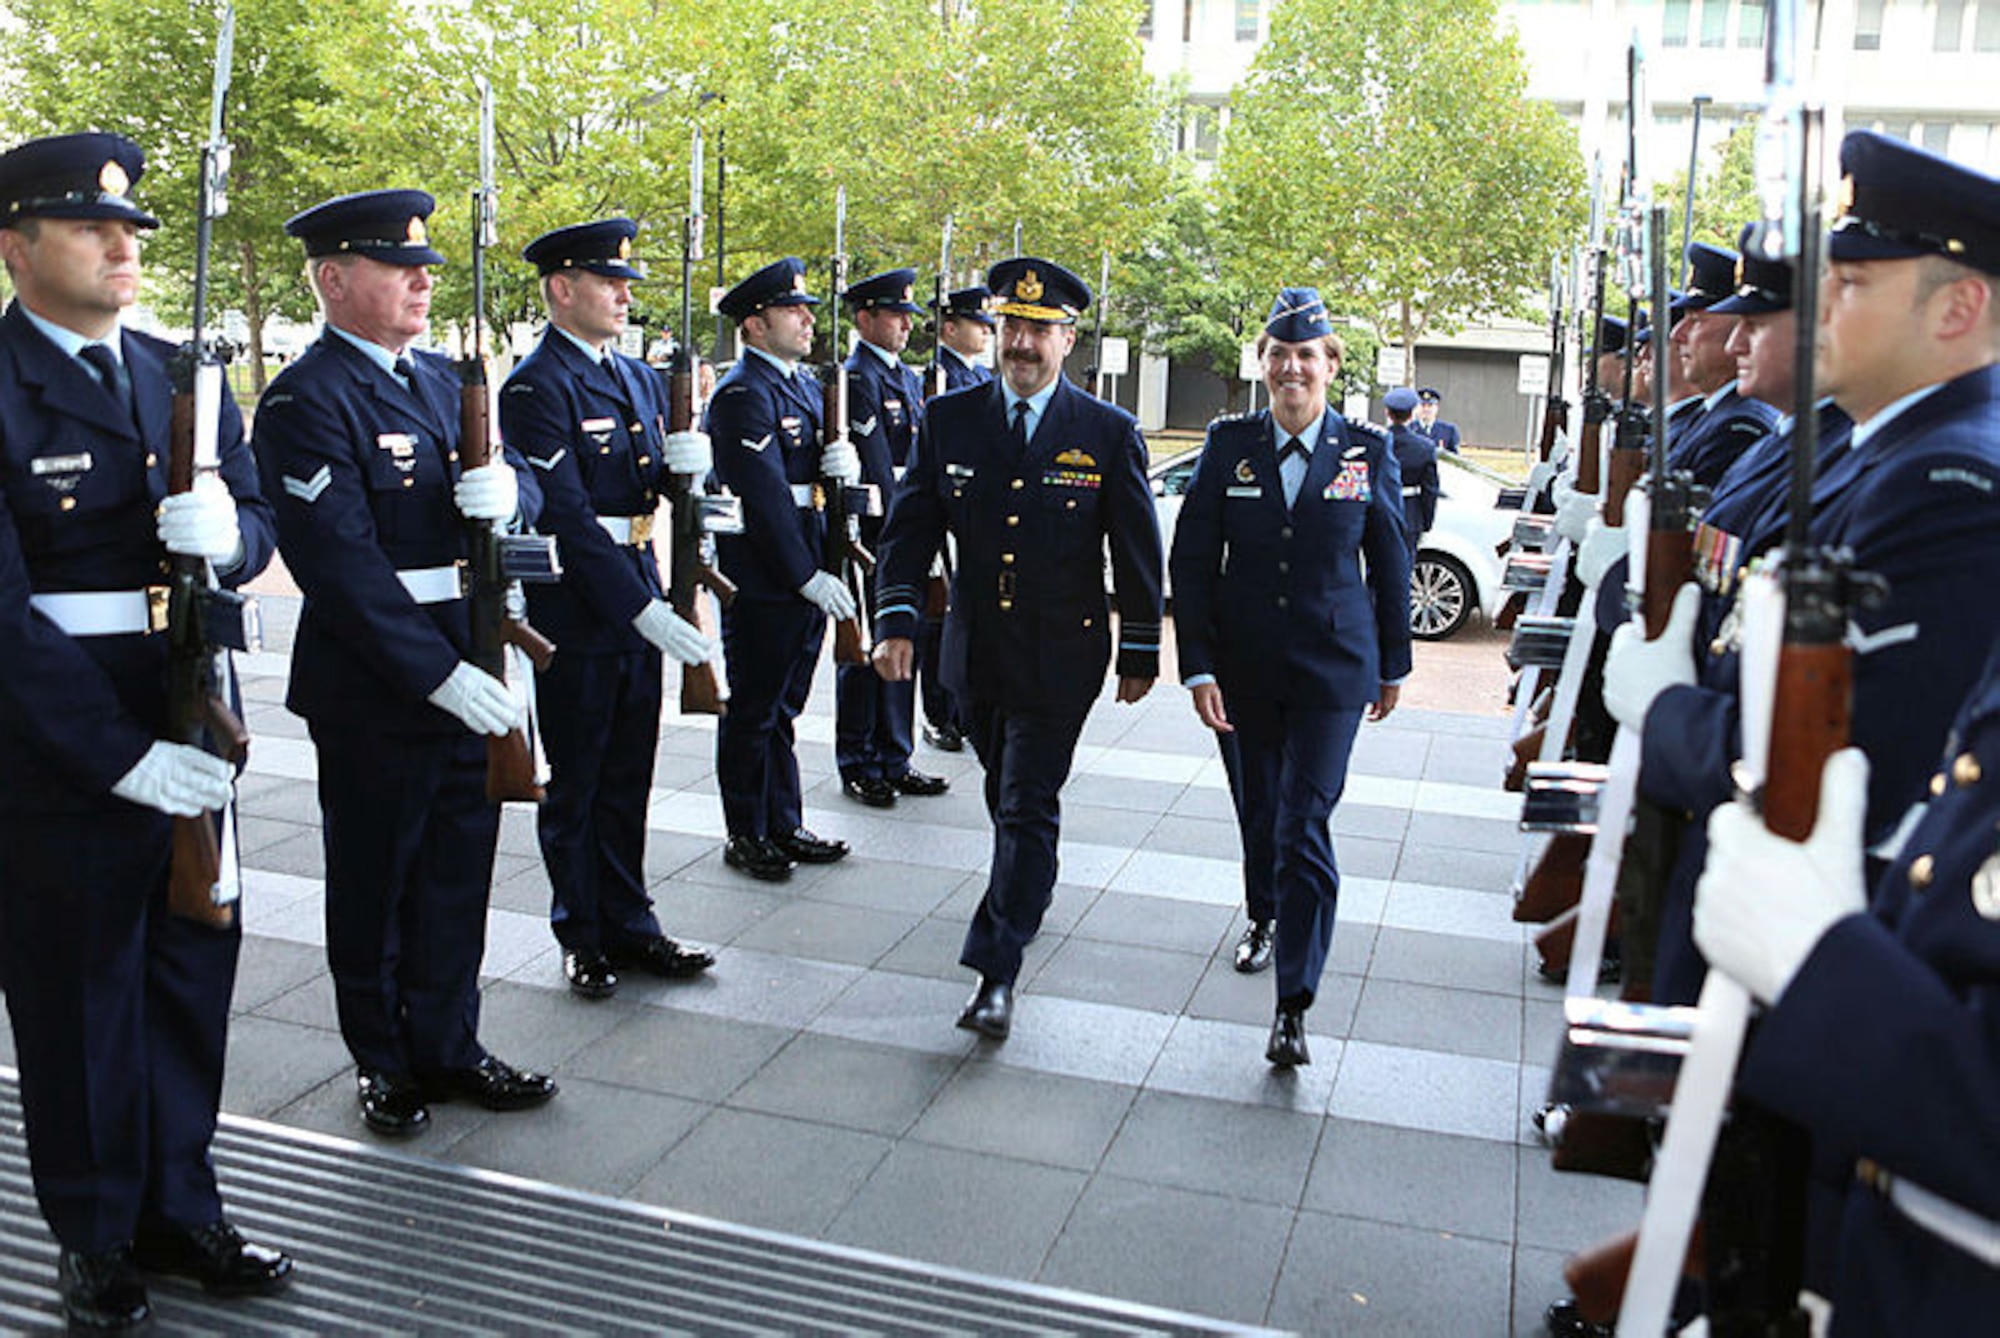 Gen. Lori Robinson, Pacific Air Forces commander, and Chief of Royal Australia Air Force, Air Marshal Leo Davies, arrive through the Stair Guard at Russell Offices in Canberra, Australia, March 9, 2016, as part of her two-week visit to New Zealand and Australia. The trip served to improve relations with both nations and reaffirmed PACAF’s commitment to the rebalance in the Pacific. (Photo by RAAF SGT Pete Gammie)